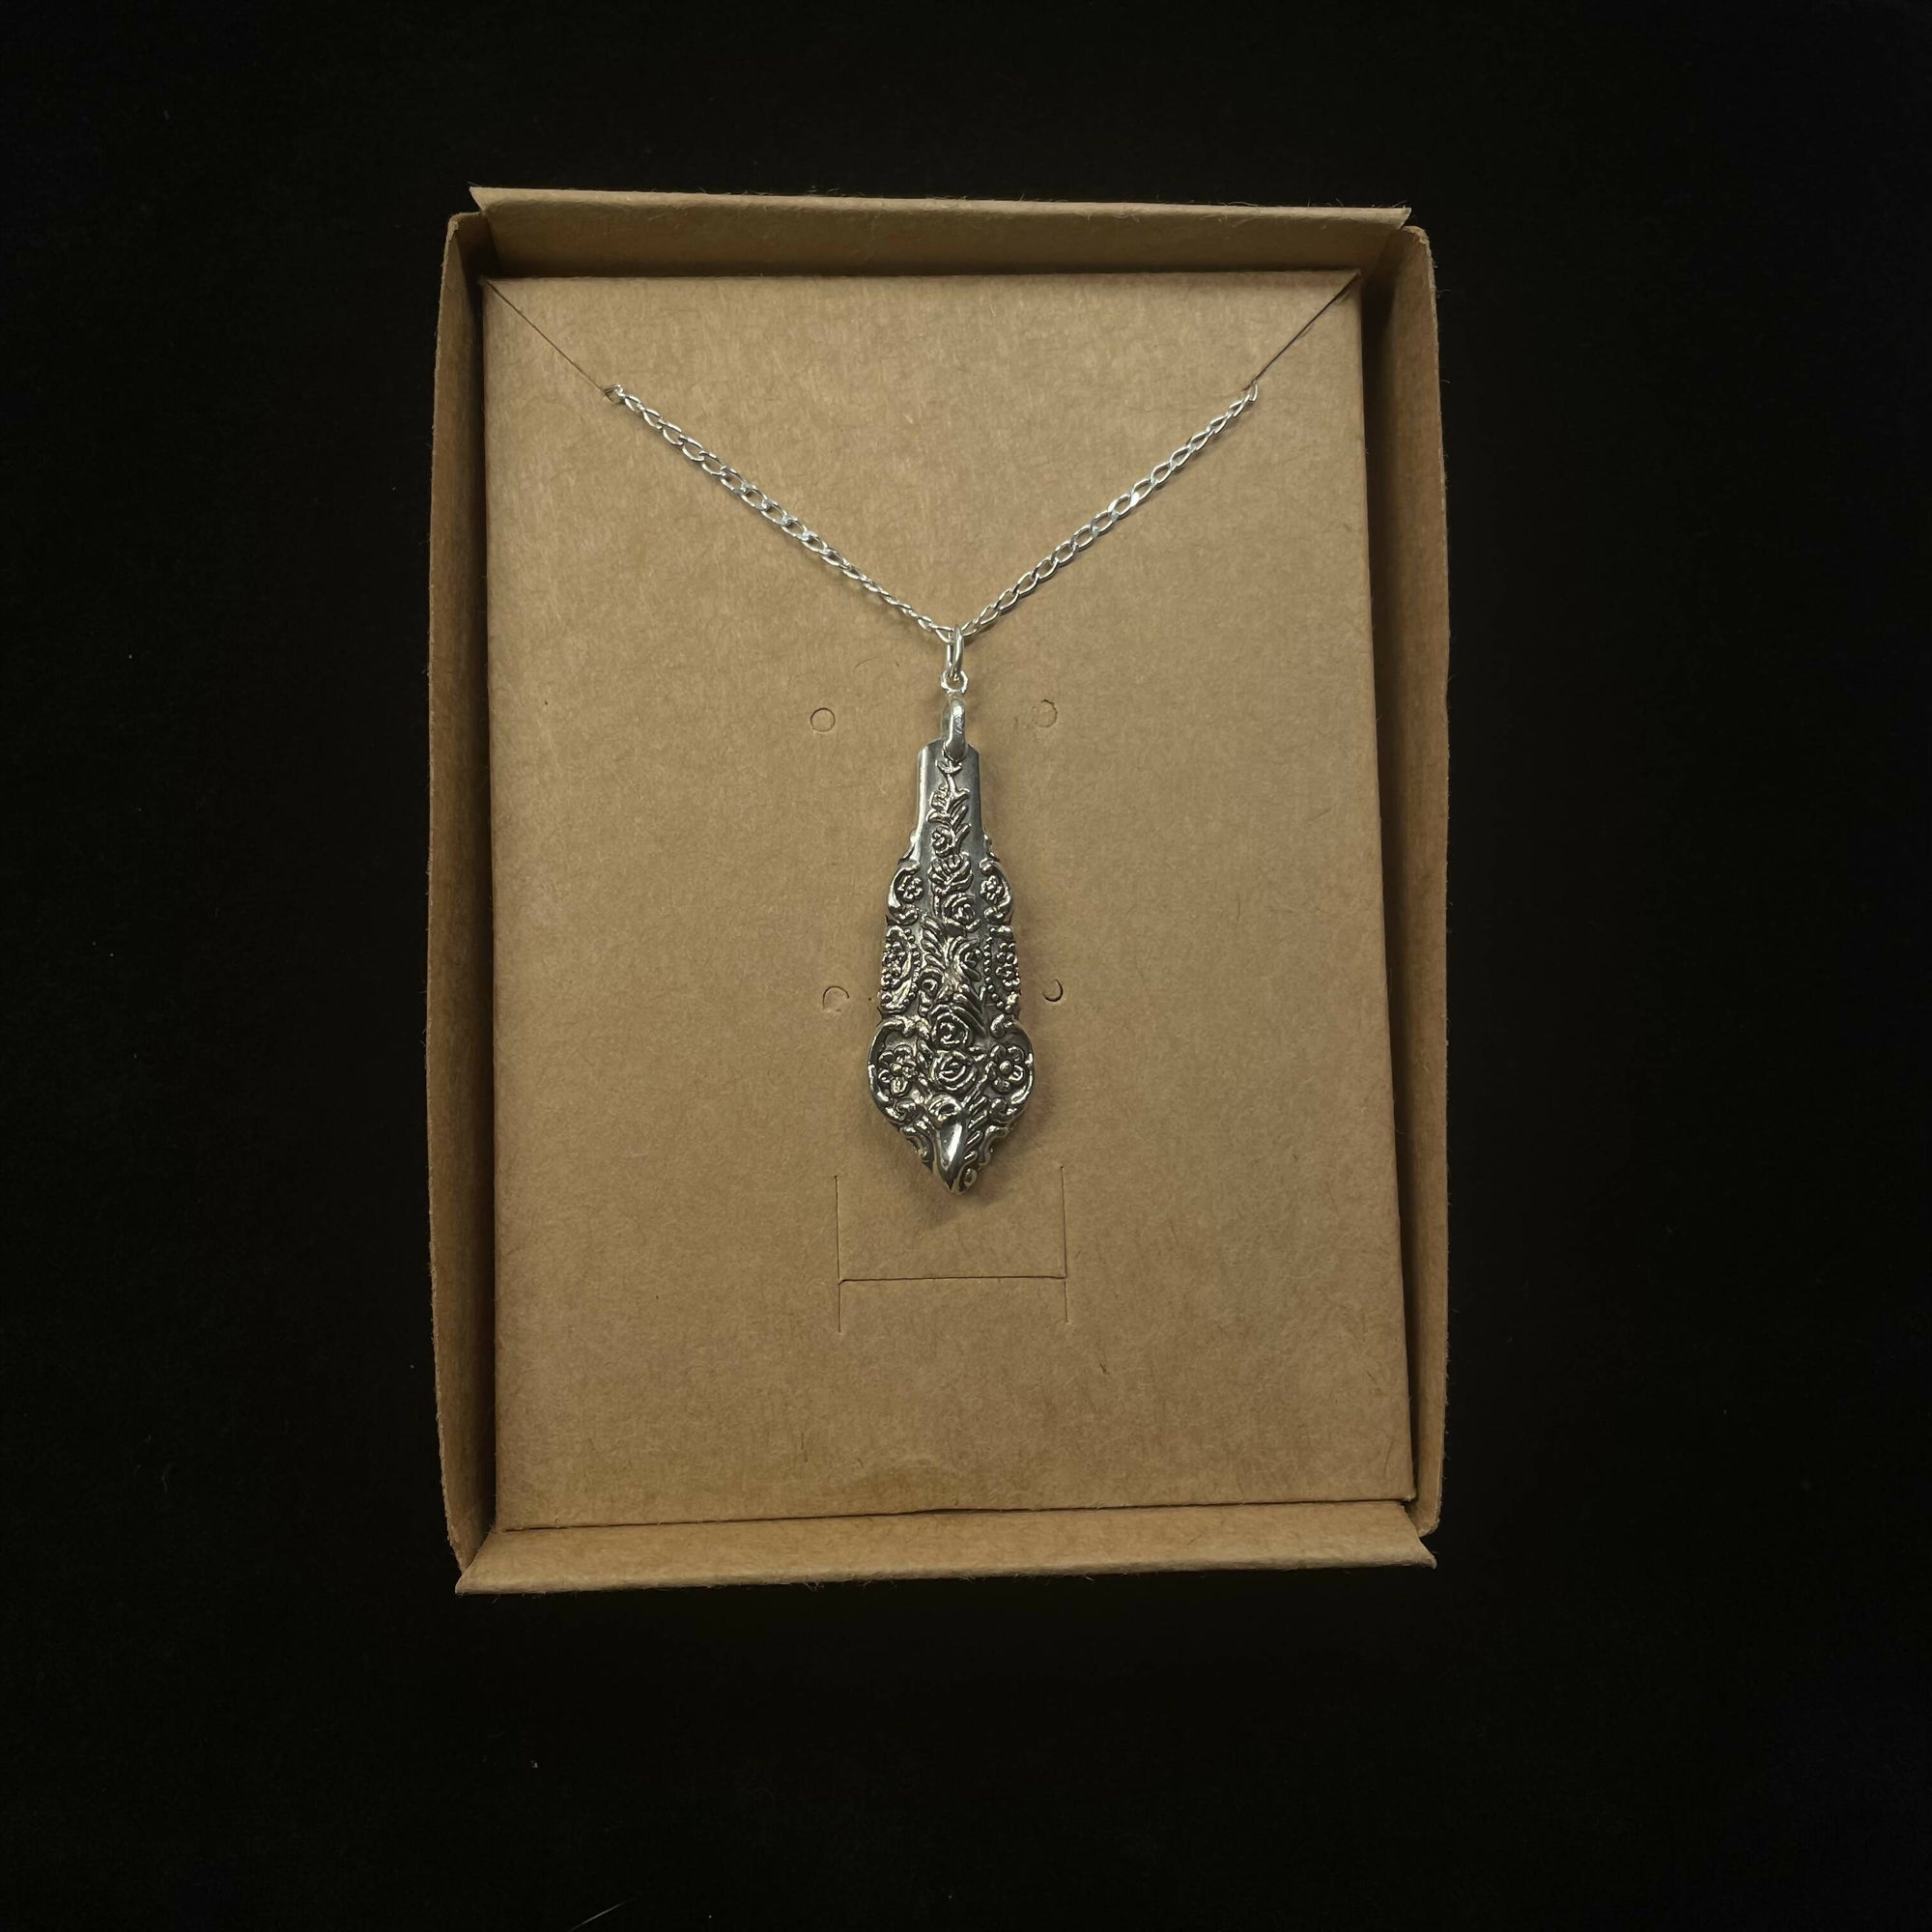 Repurposing By Glenna |22” Silver spoon pendant necklace with flowers and swirls (pendant is reversible)